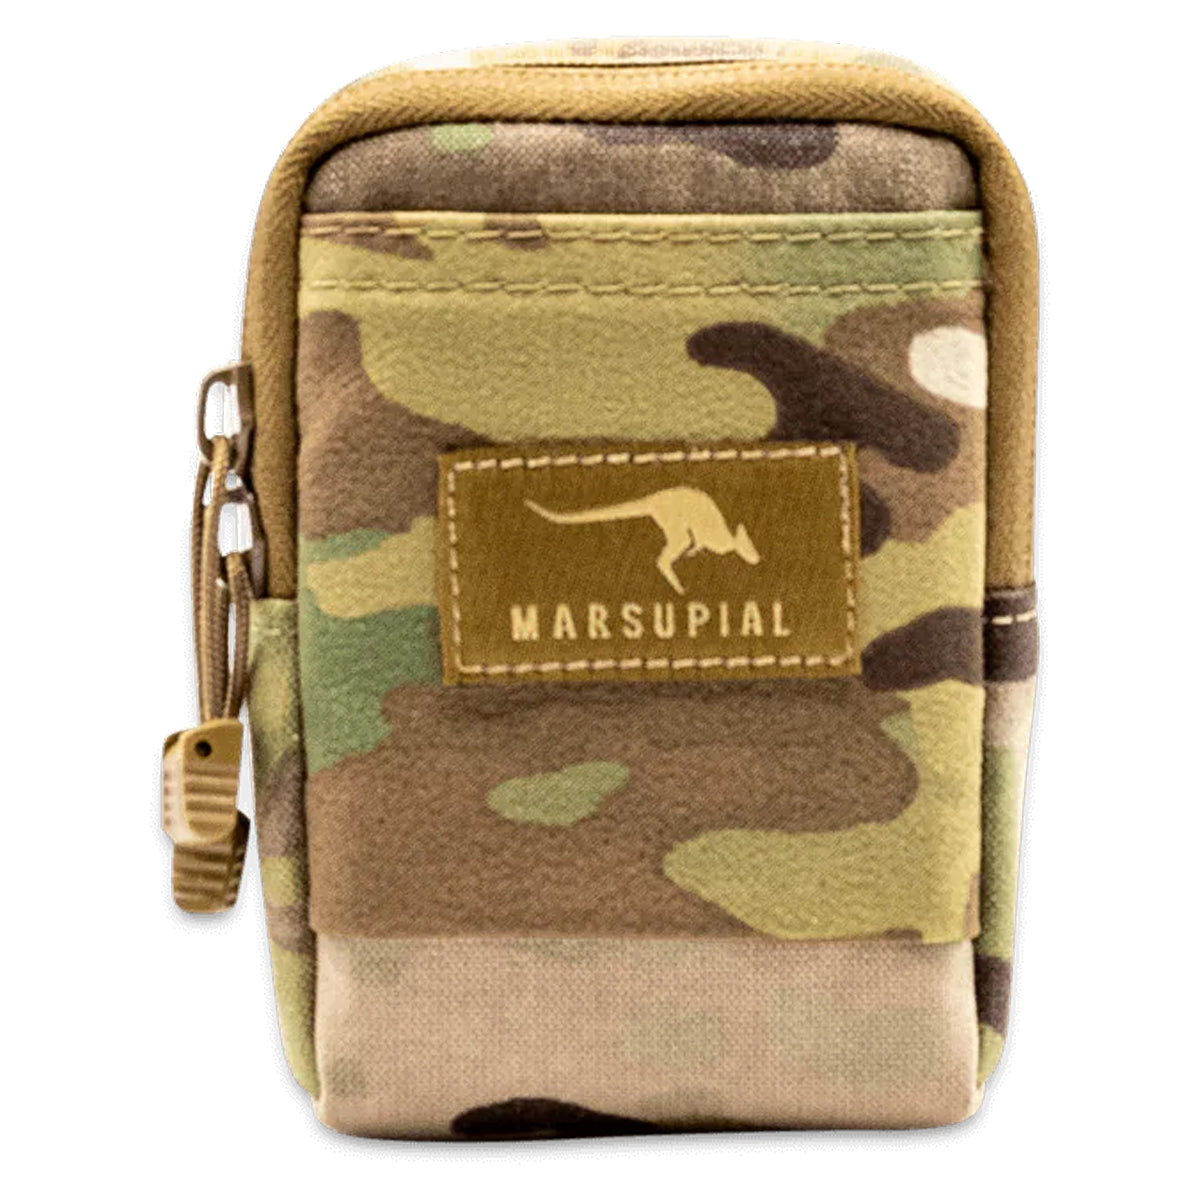 Marsupial Gear - Small Zippered Pouch Large / Wolf and Coyote